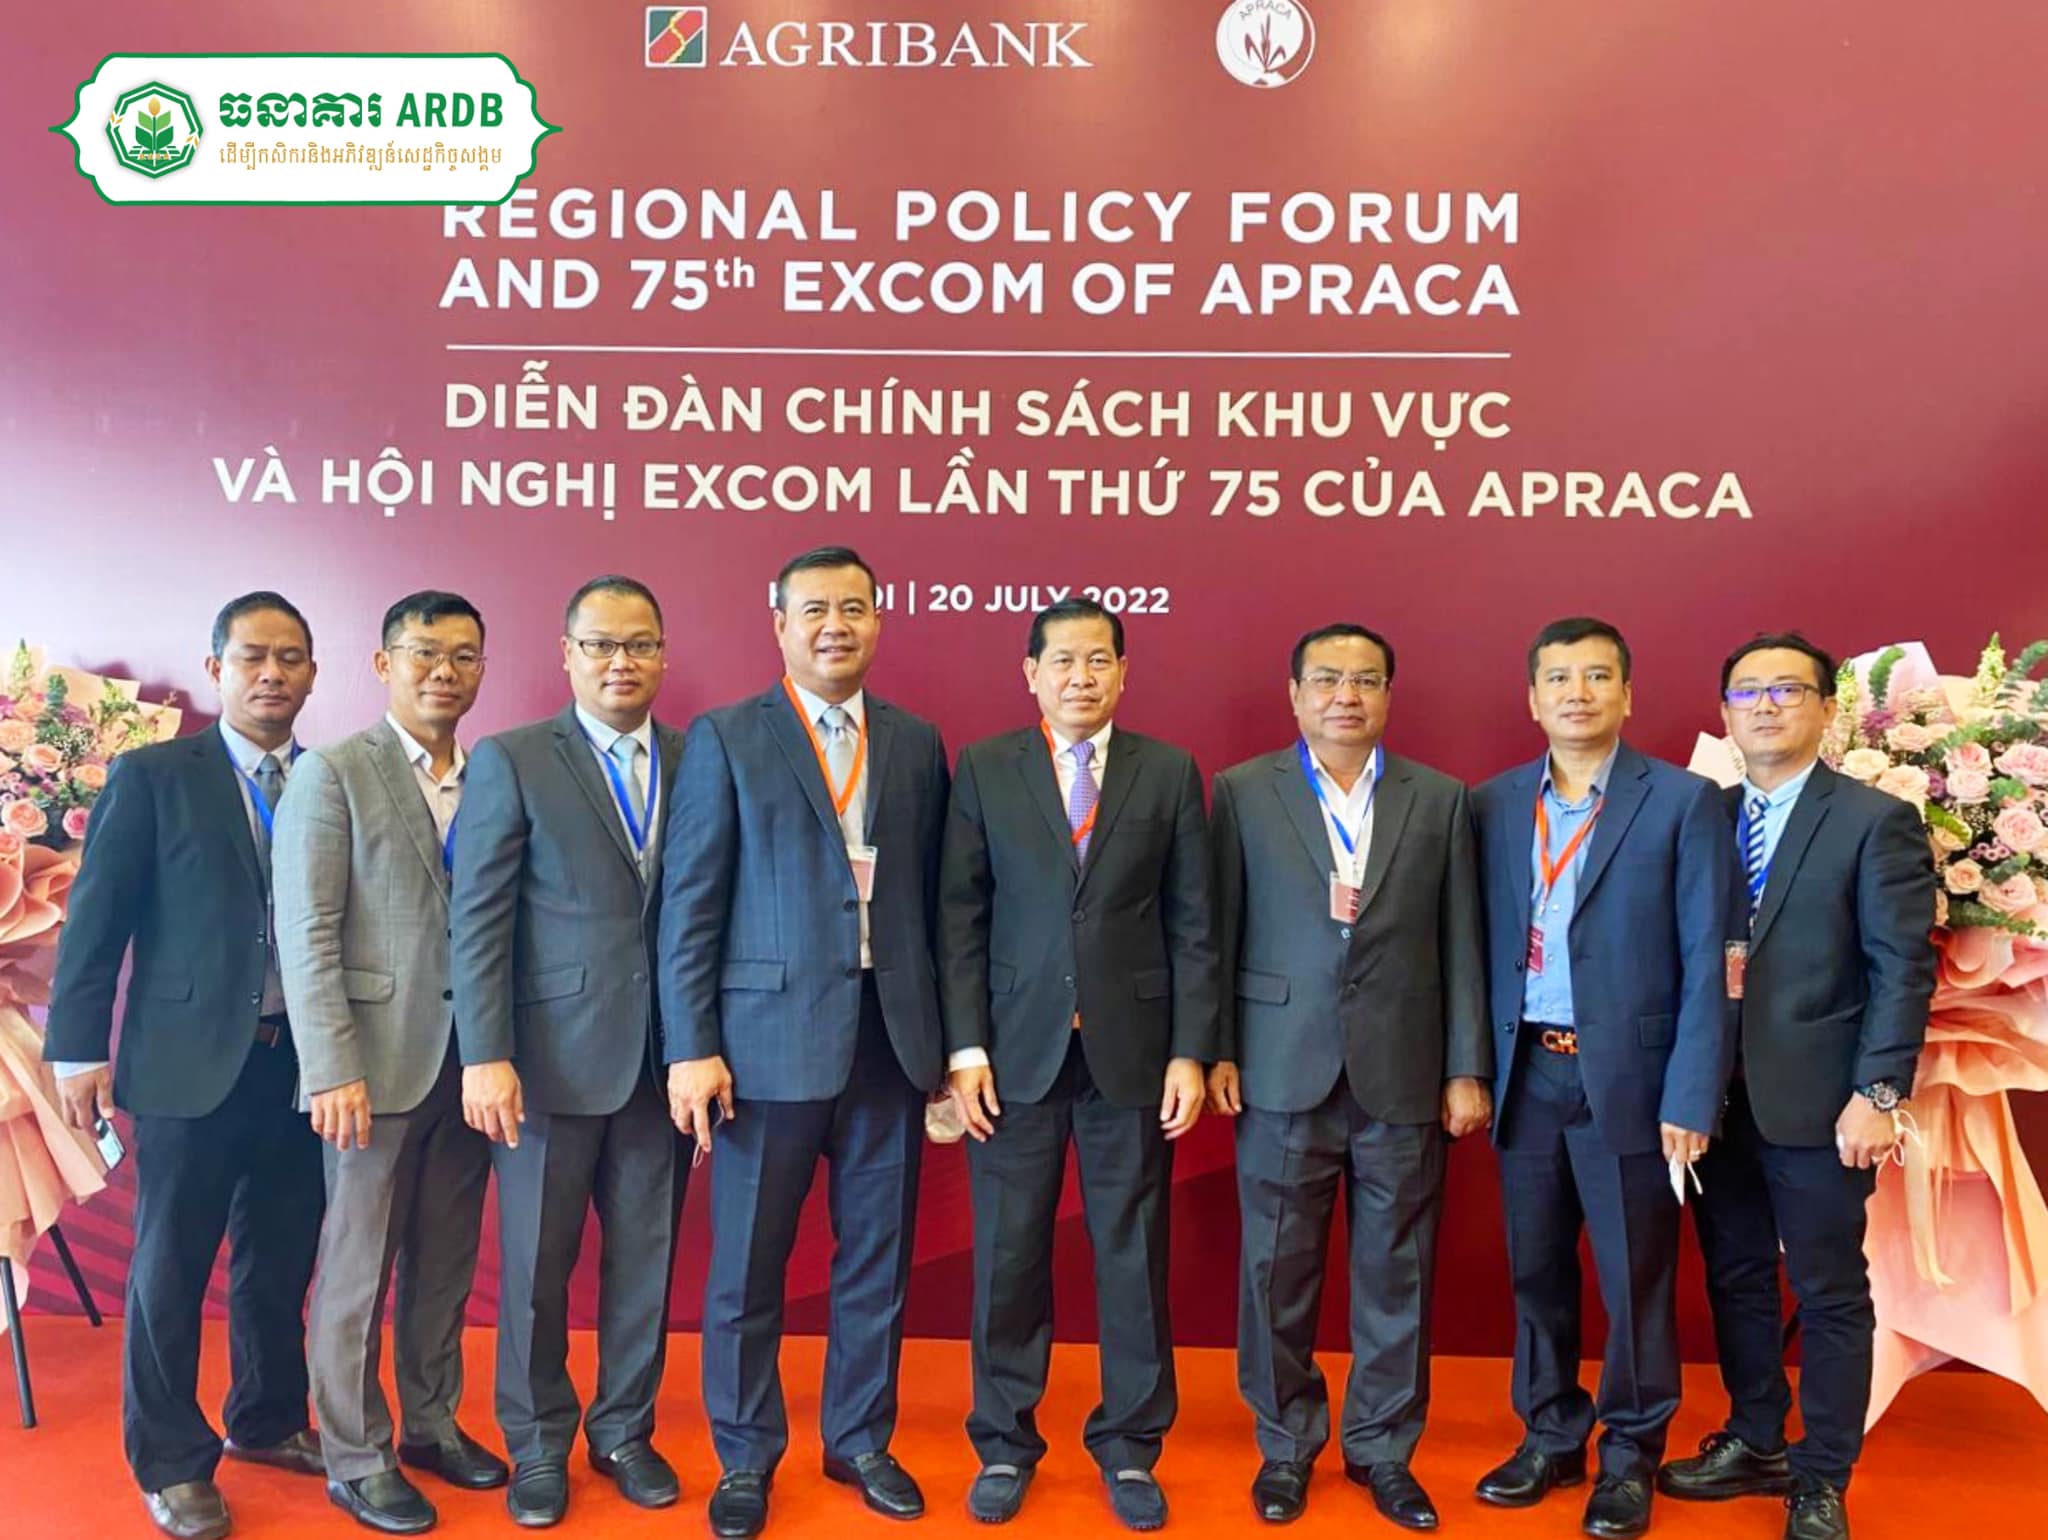 HE Dr. Kao Thach, the Royal Government Delegate in charge as CEO of Agricultural and Rural Development Bank (ARDB) led the delegation to join the Regional Policy Forum as a Critical Vehicle to Financial Inclusion for Farmer Collectives hosted by Vietnam Bank for Agriculture and Rural Development (VBARD/Agribank) in collaboration with the Asia-Pacific Rural and Agricultural Credit Association (APRACA)